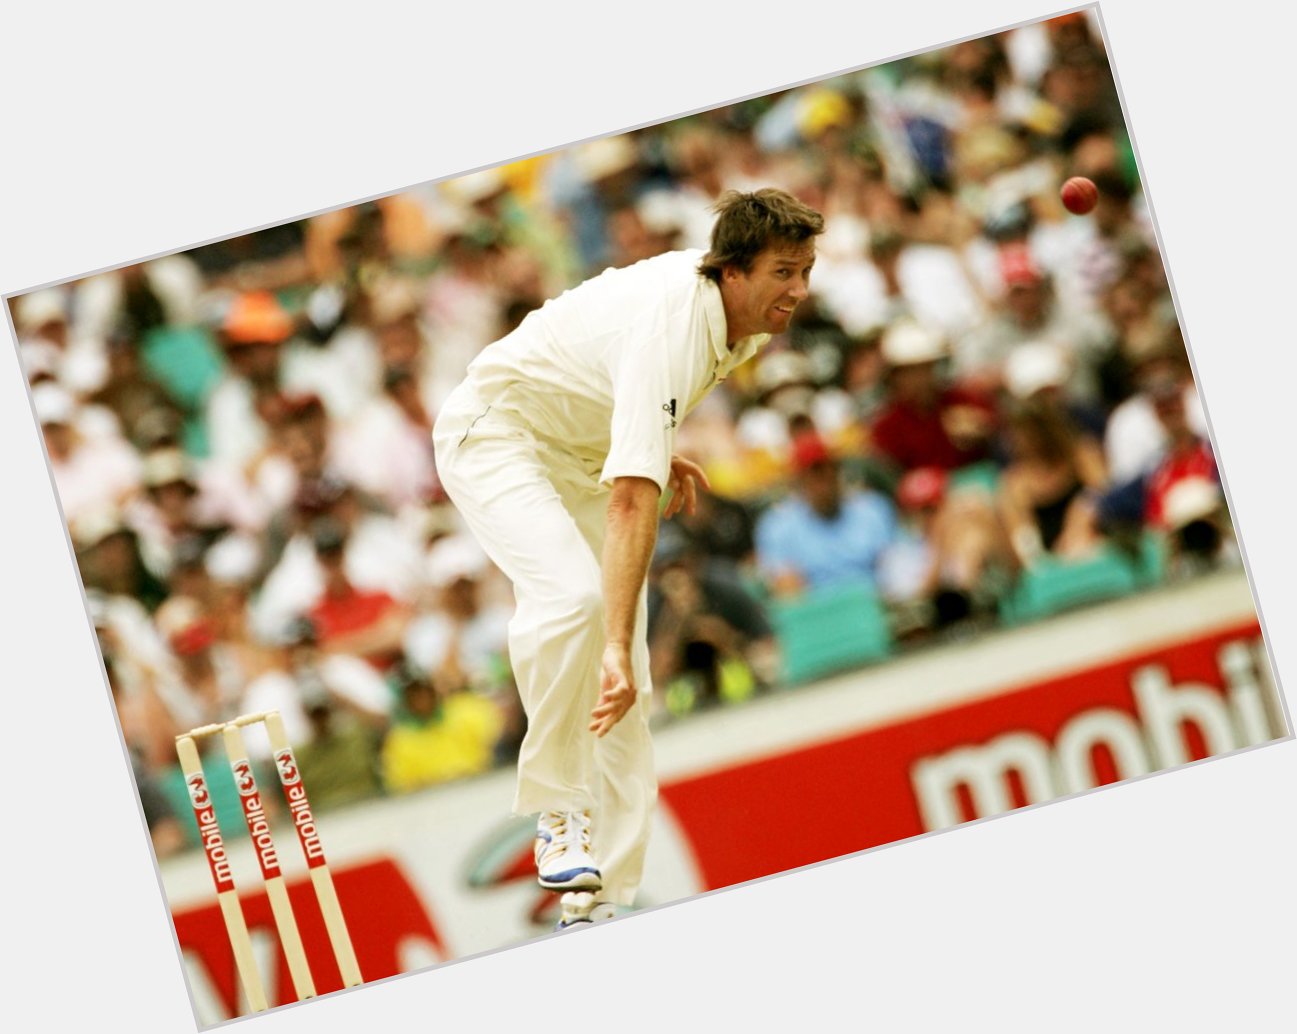 124 Tests
563 wickets
Average: 21.64

Happy 50th birthday to one of the greatest ever, Glenn McGrath. 